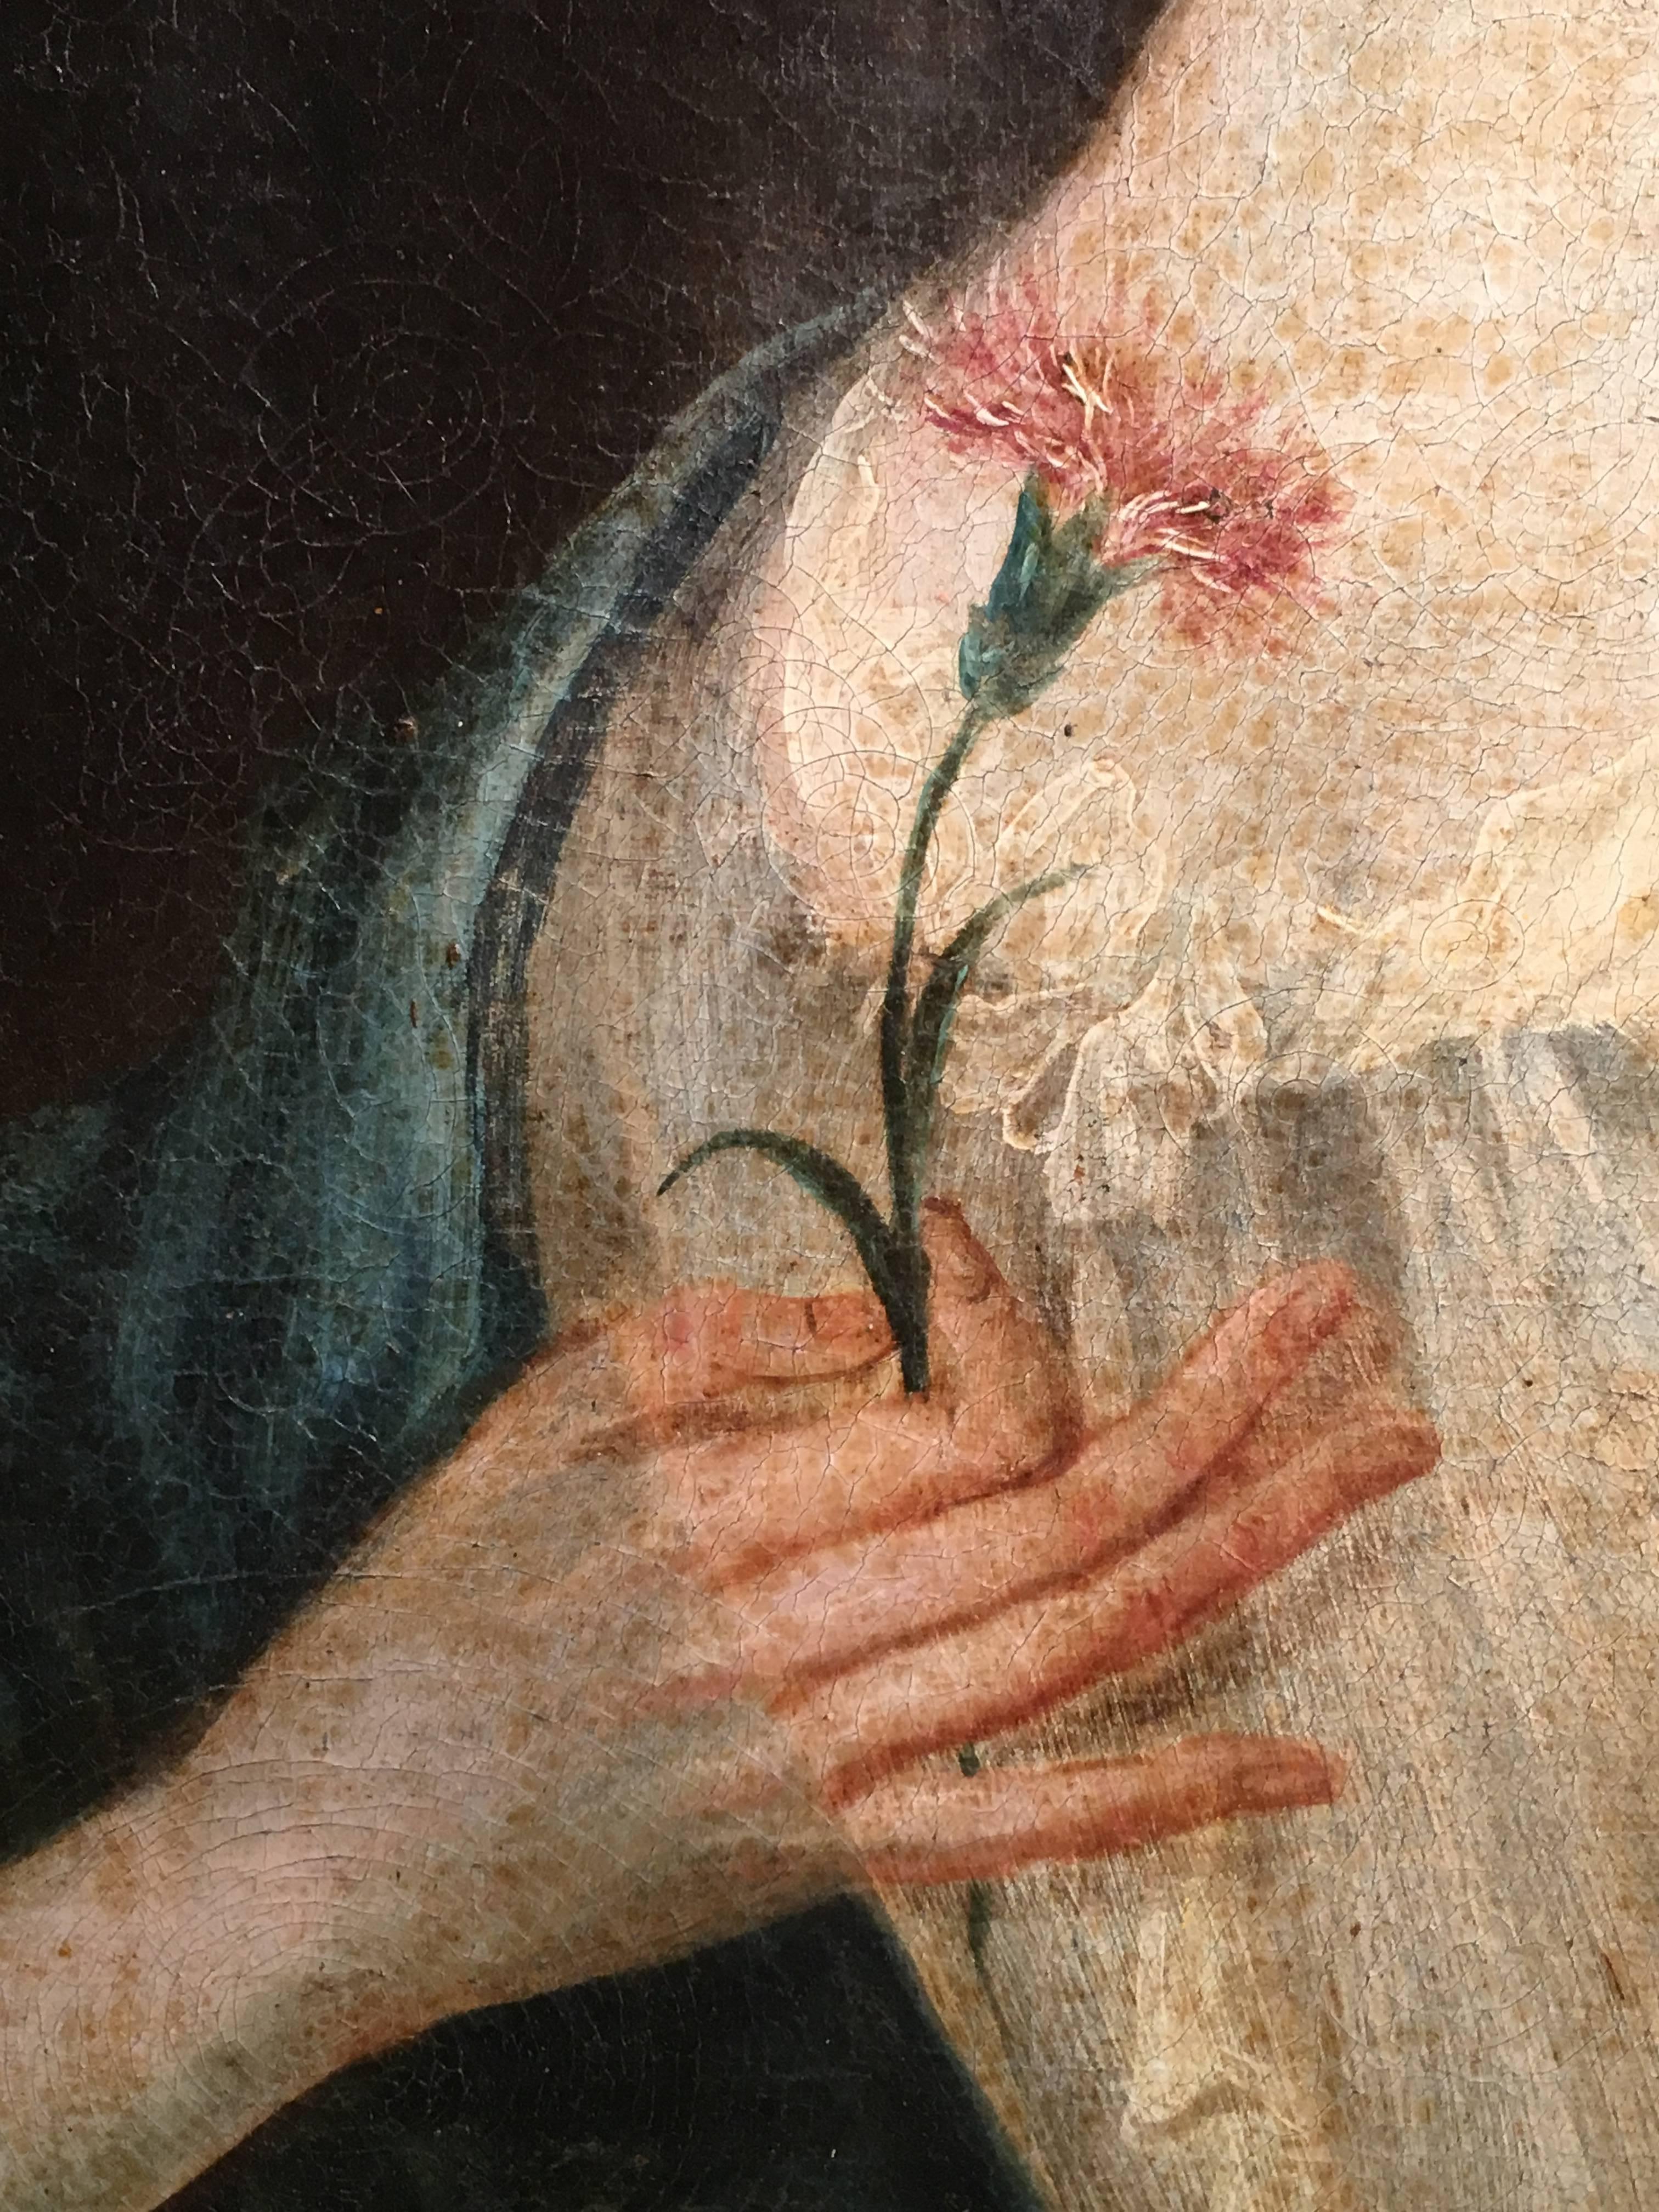 English 18th Century Portrait of a Girl with Flower